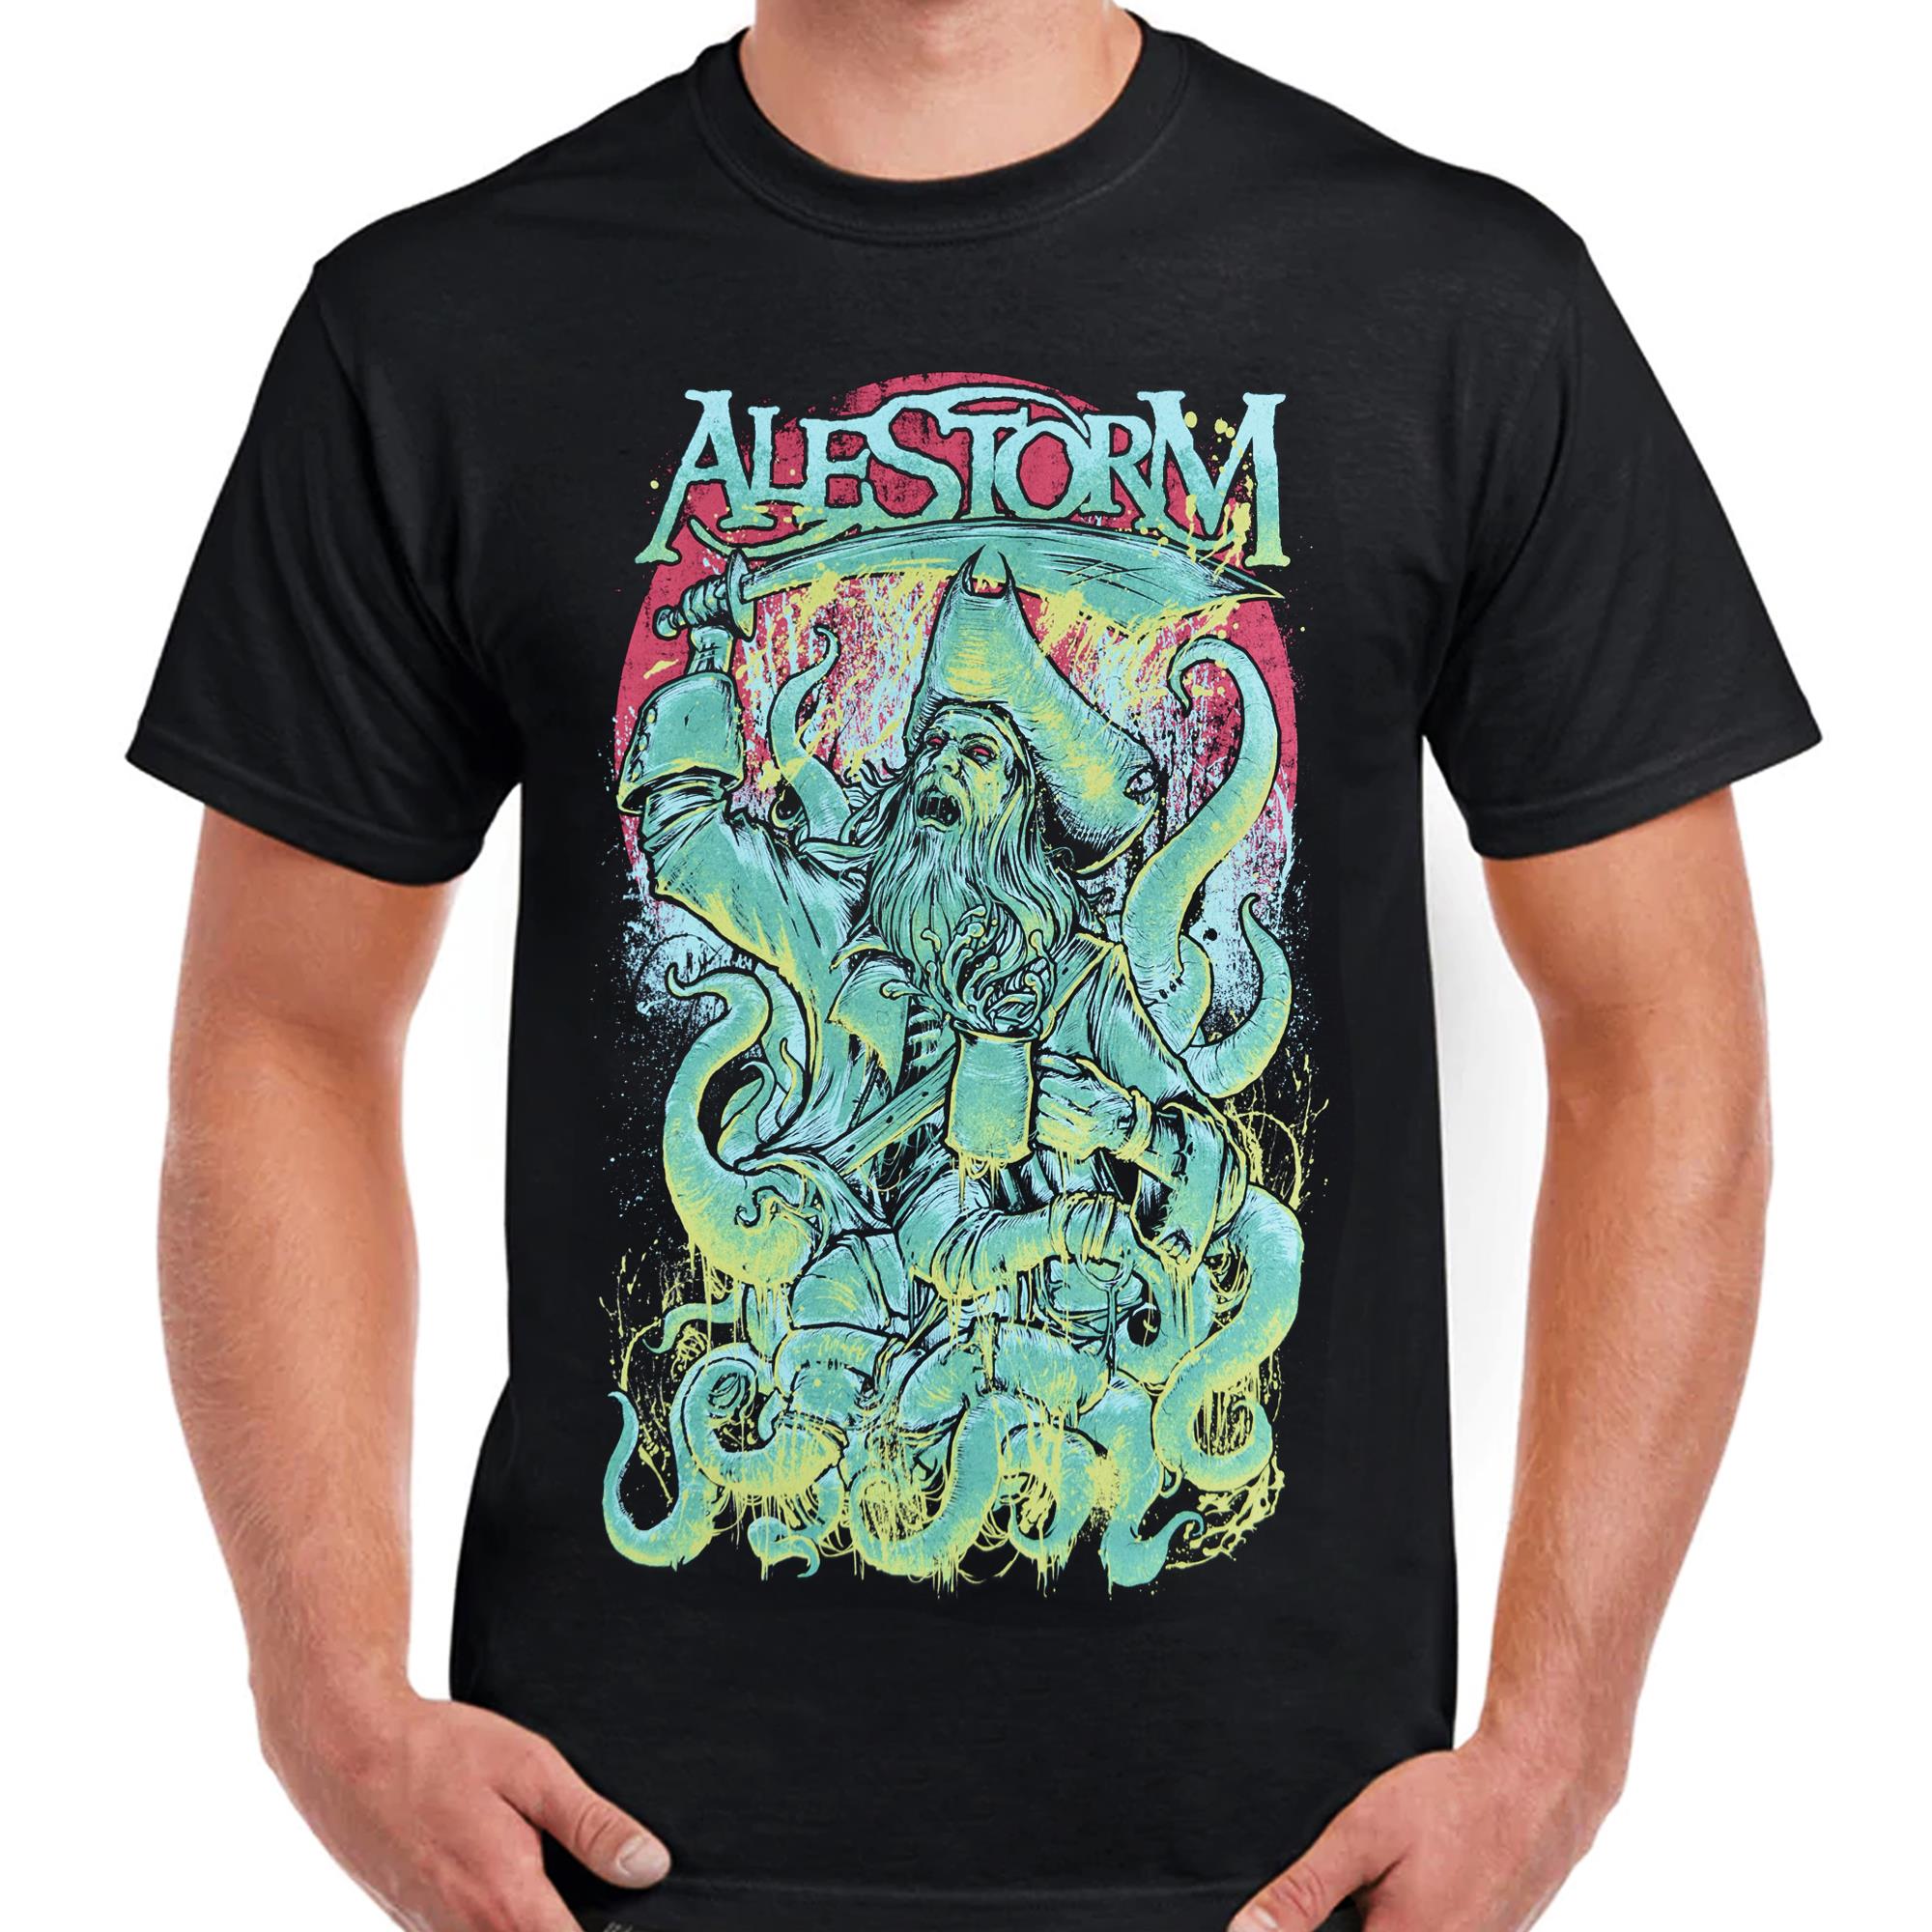 Alestorm /'You Fight Like A Dairy Farmer/' T-Shirt NEW /& OFFICIAL! Black